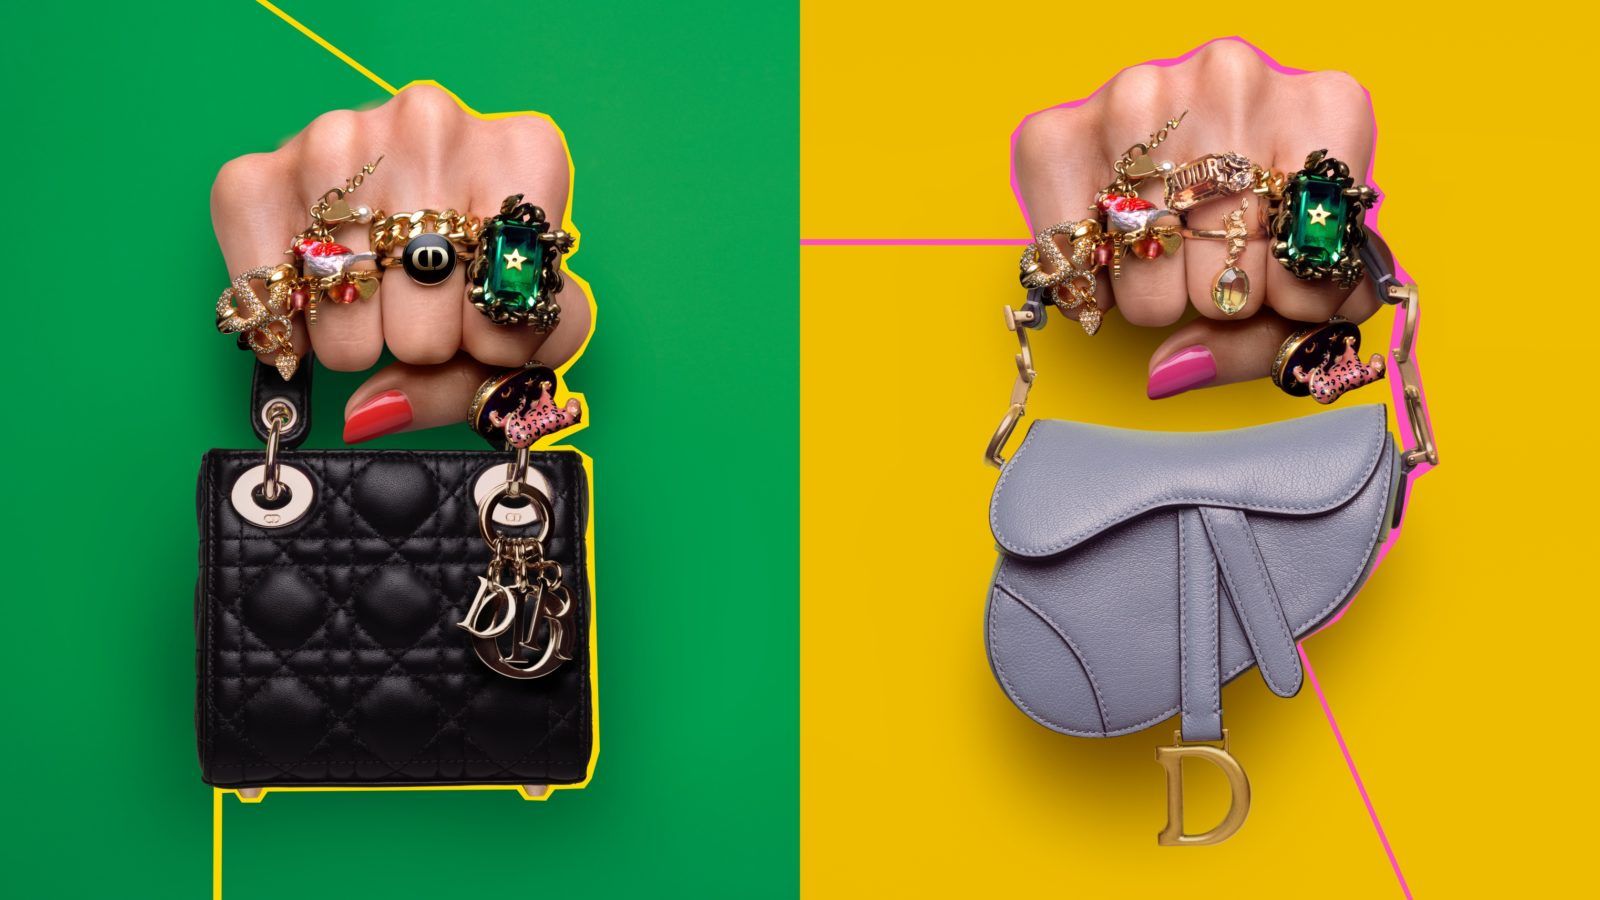 Downsize that Dior! A new micro collection of icons from the fashion House